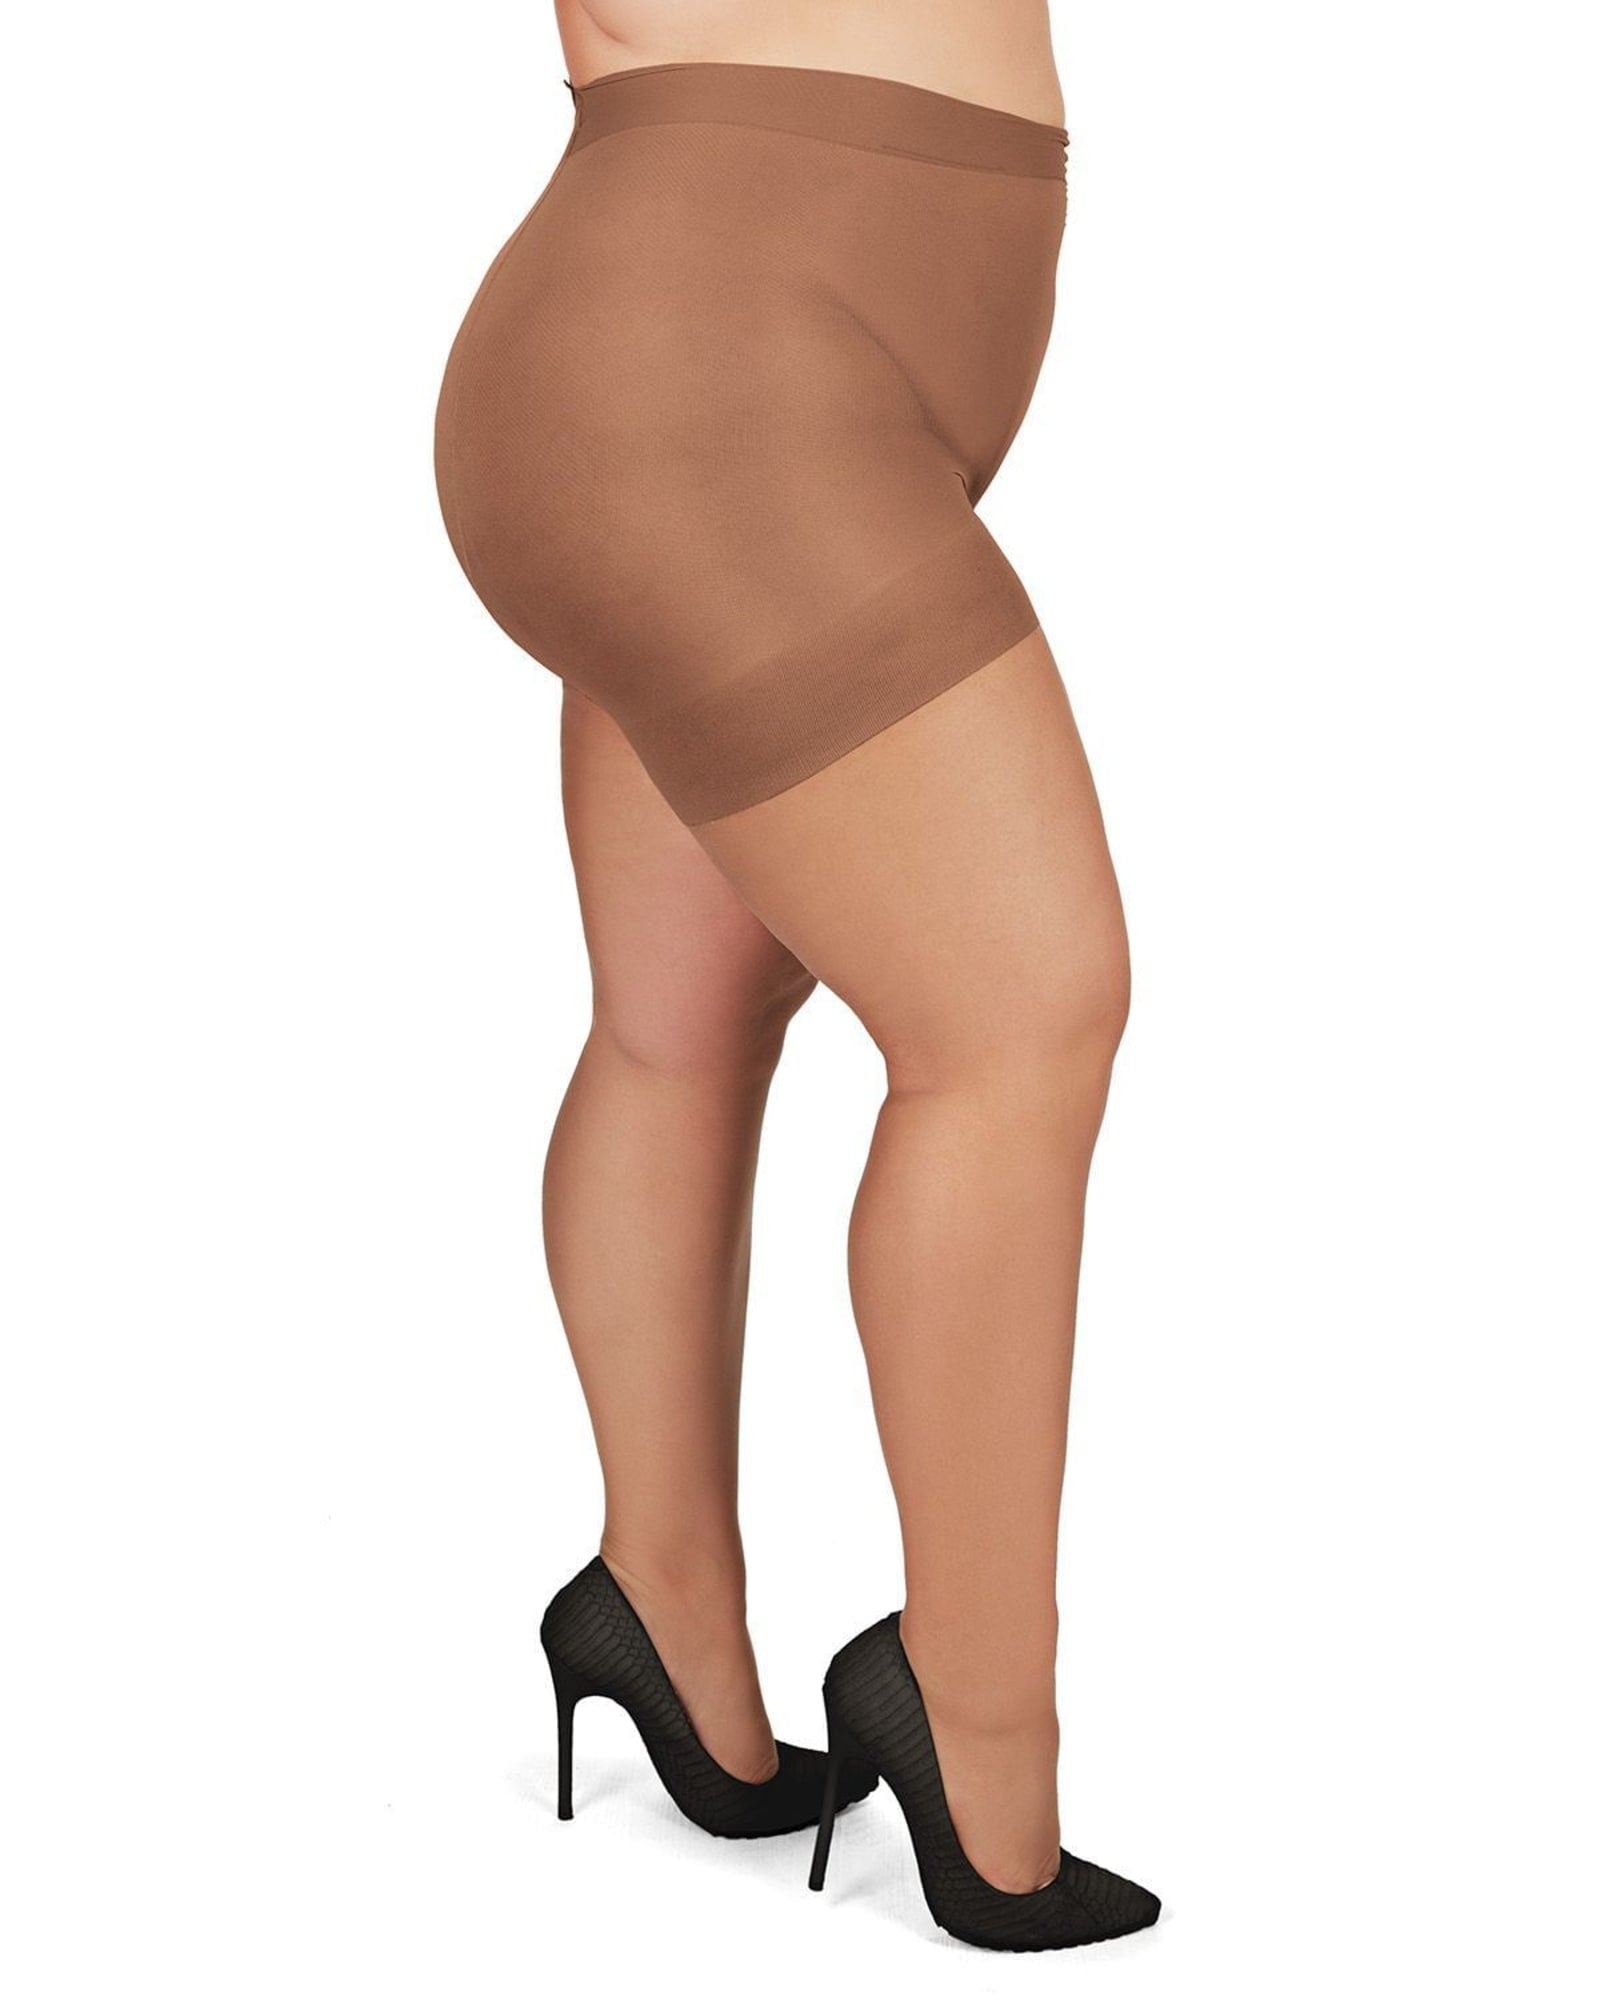 All Day Plus Size Curvy Sheer Control Top Pantyhose | Utopia